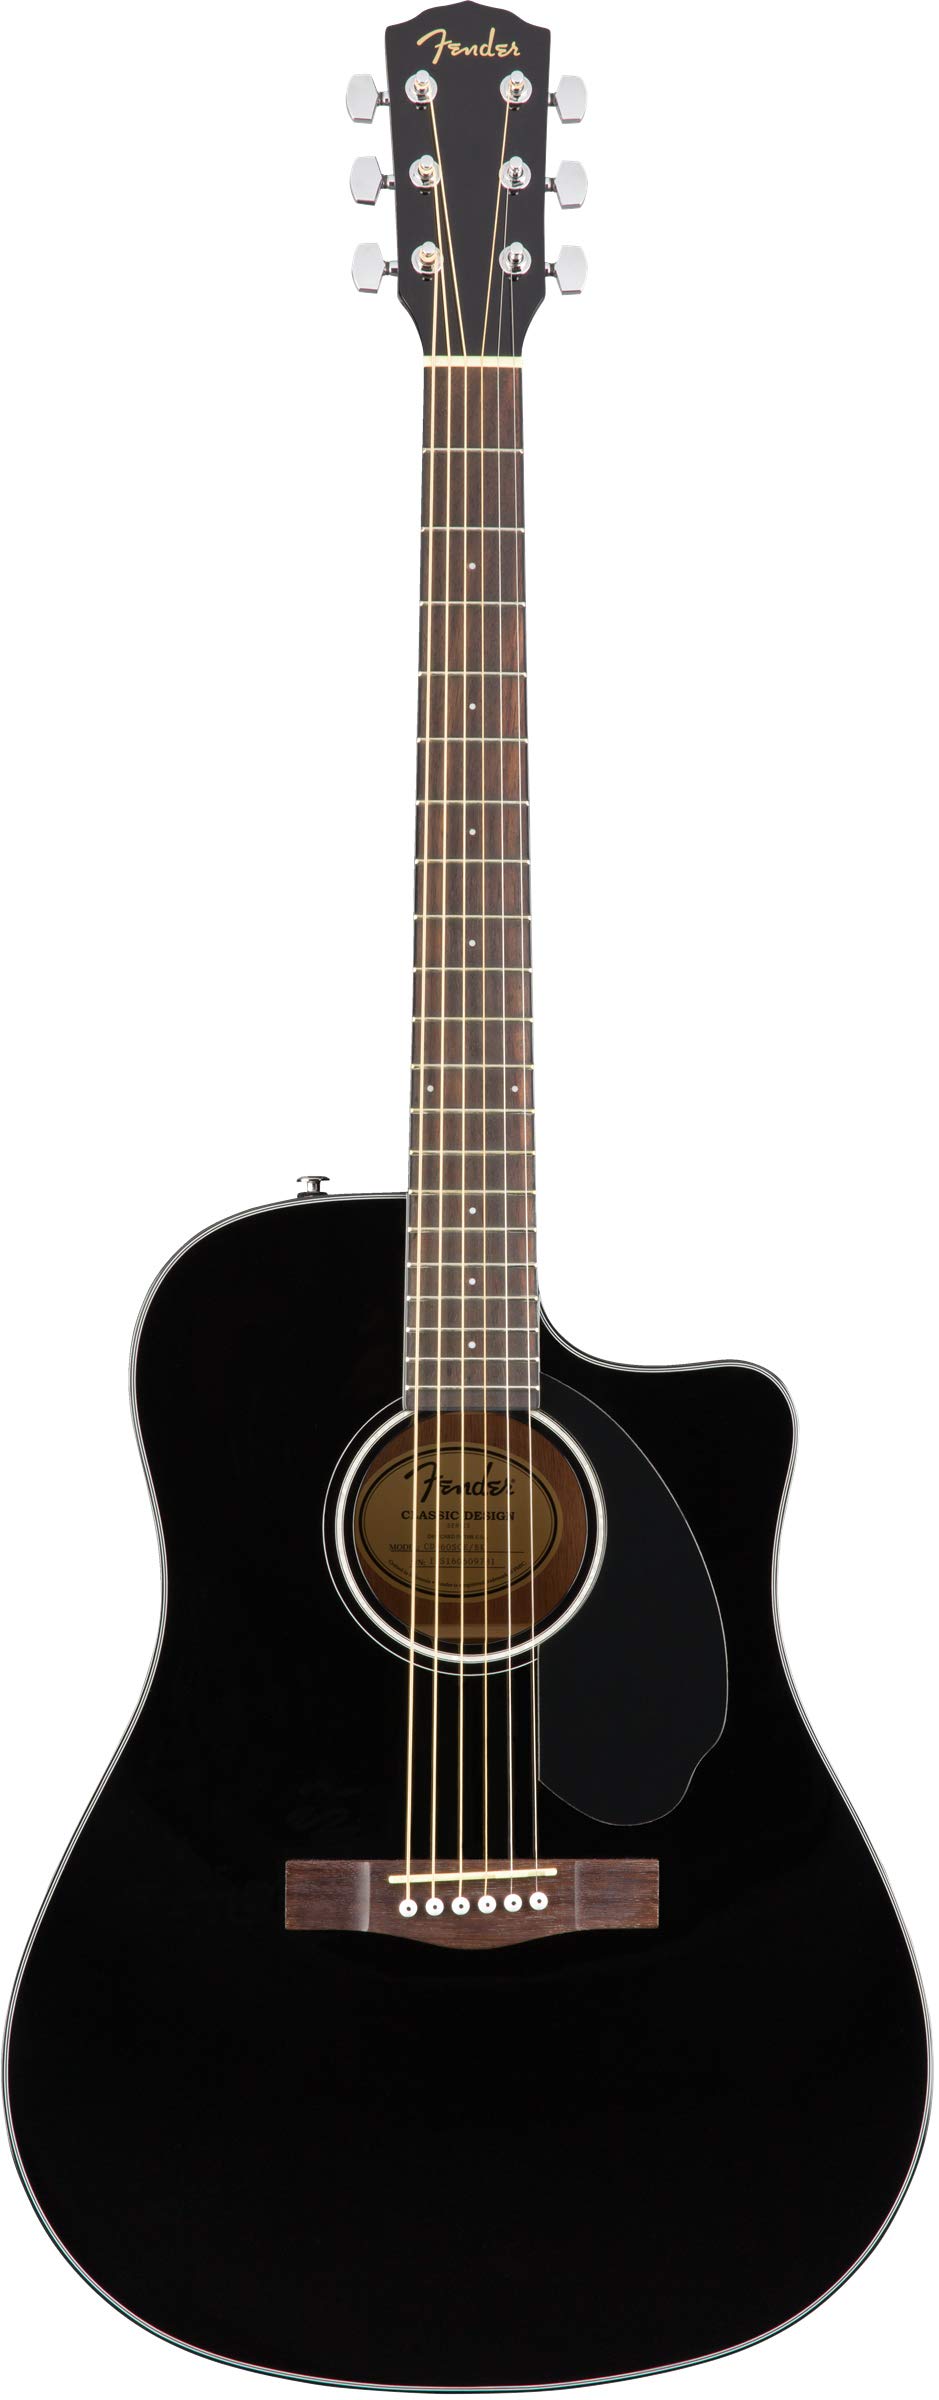 Fender CD-60SCE Solid Top Dreadnought Acoustic-Electric Guitar - Black Bundle with Hard Case, Instrument Cable, Tuner, Strap, Strings, Picks, and Austin Bazaar Instructional DVD